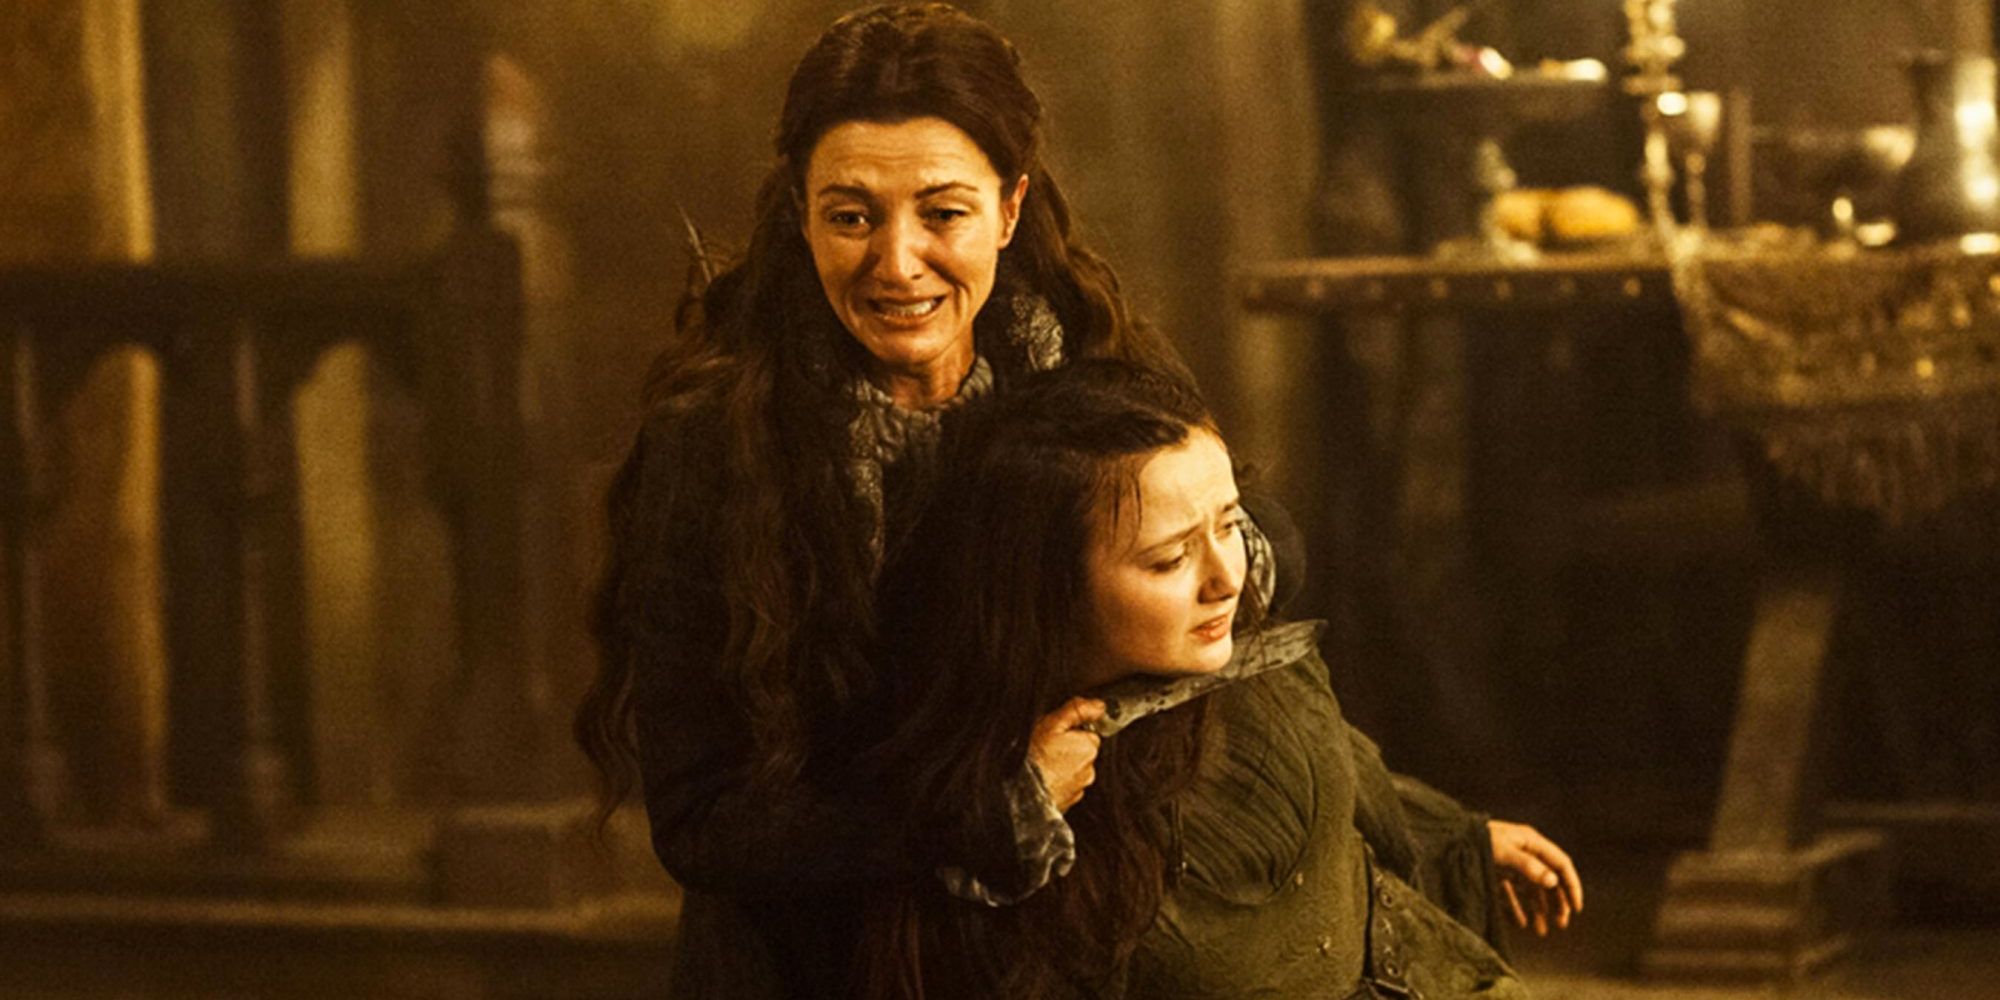 Michelle Fairley as Catelyn Stark crying and holding Frey's wife as hostage in Game of Thrones Rains of Castamere, the red wedding episode